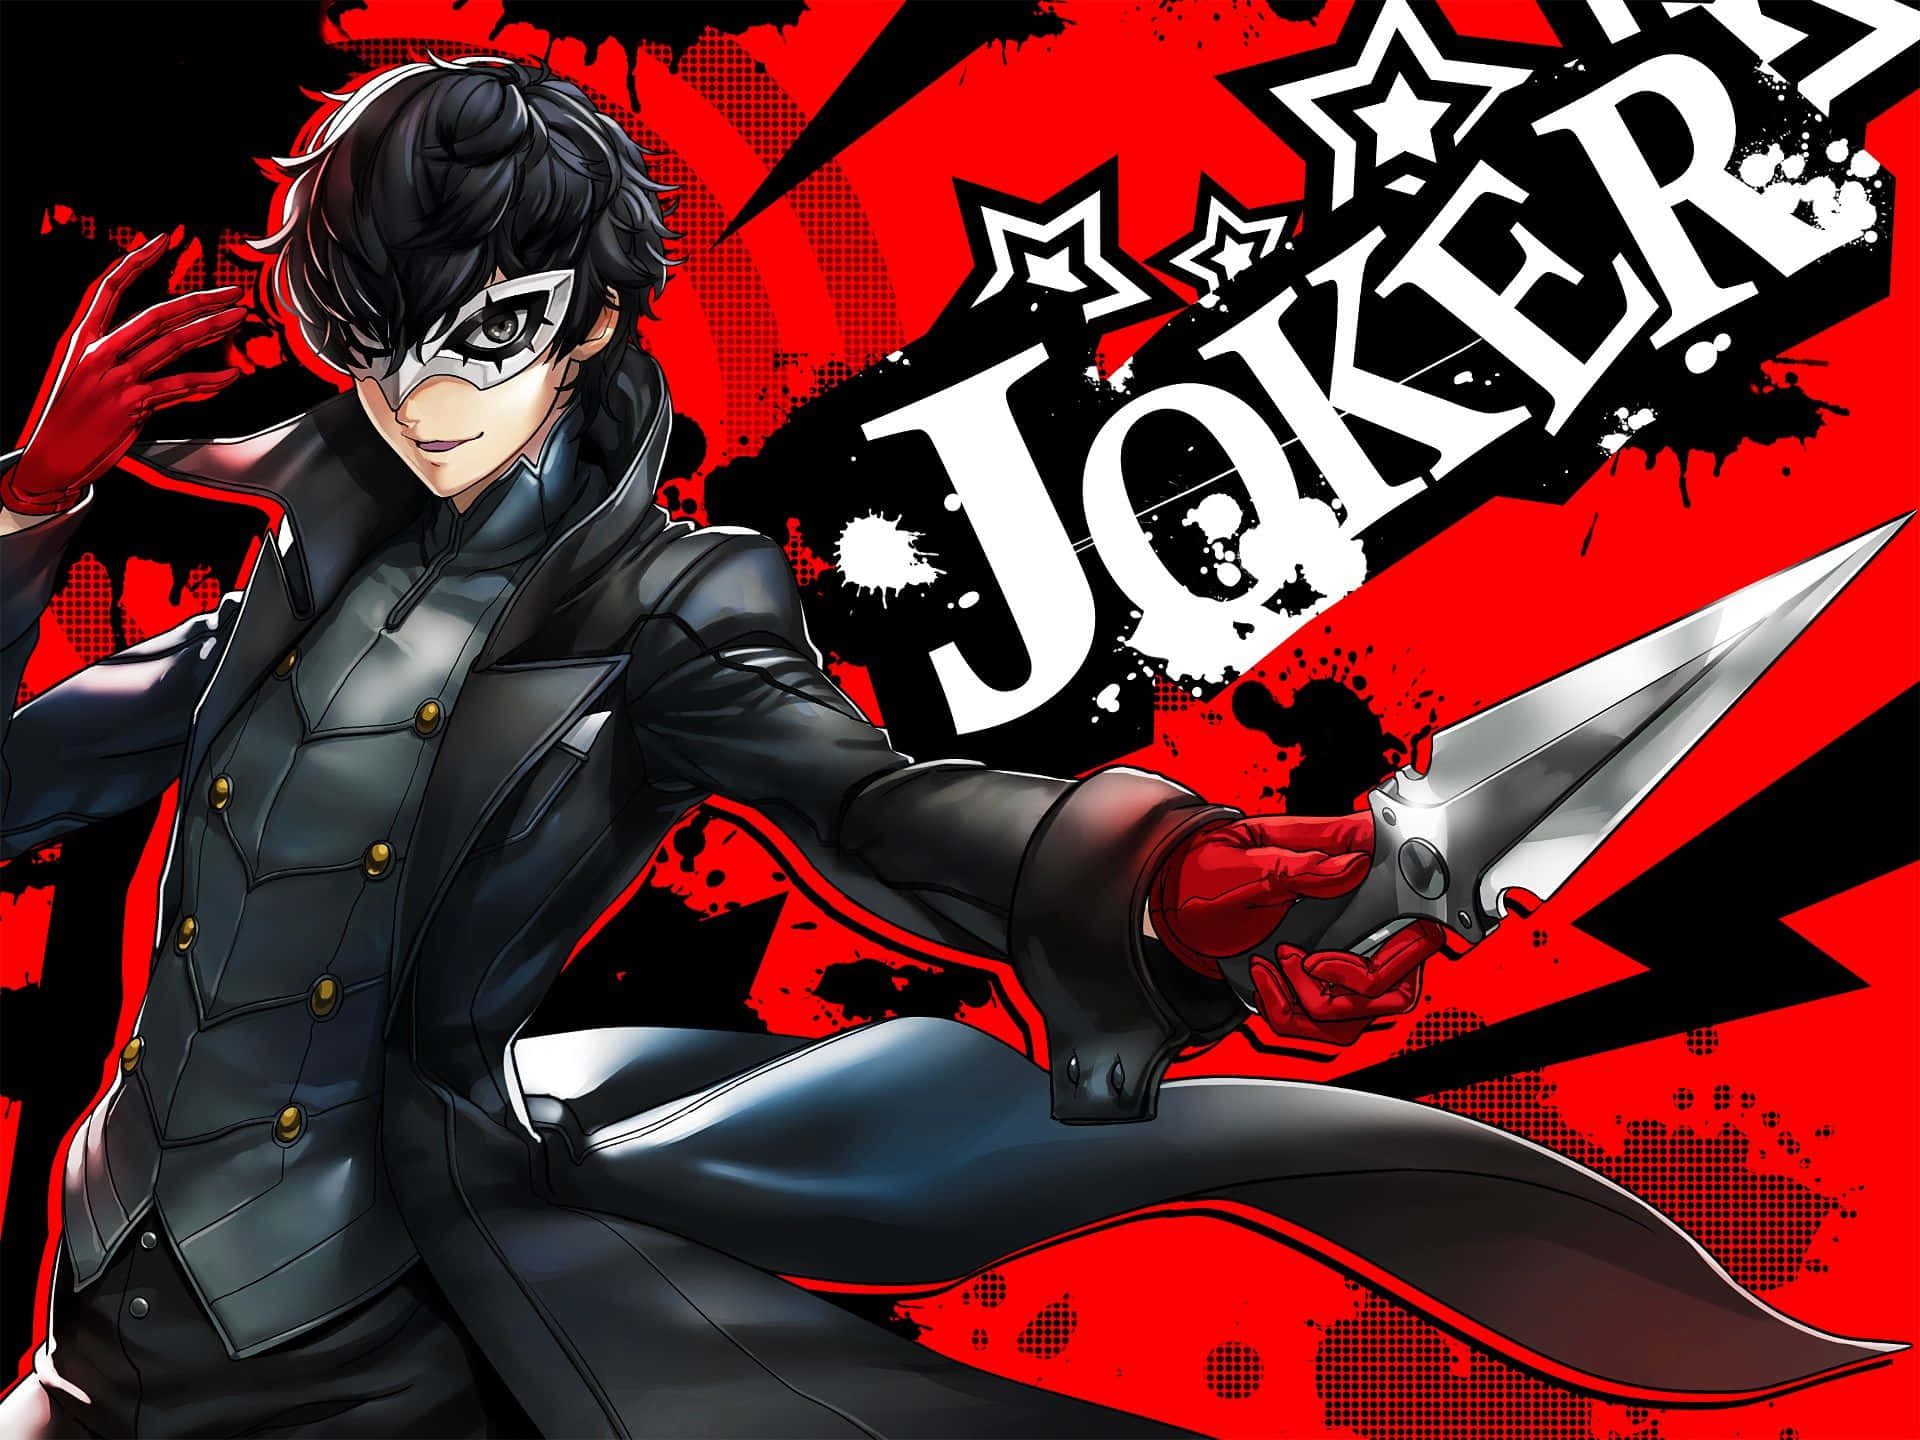 Join the Phantom Thieves and Take Back the Heart of the City Wallpaper